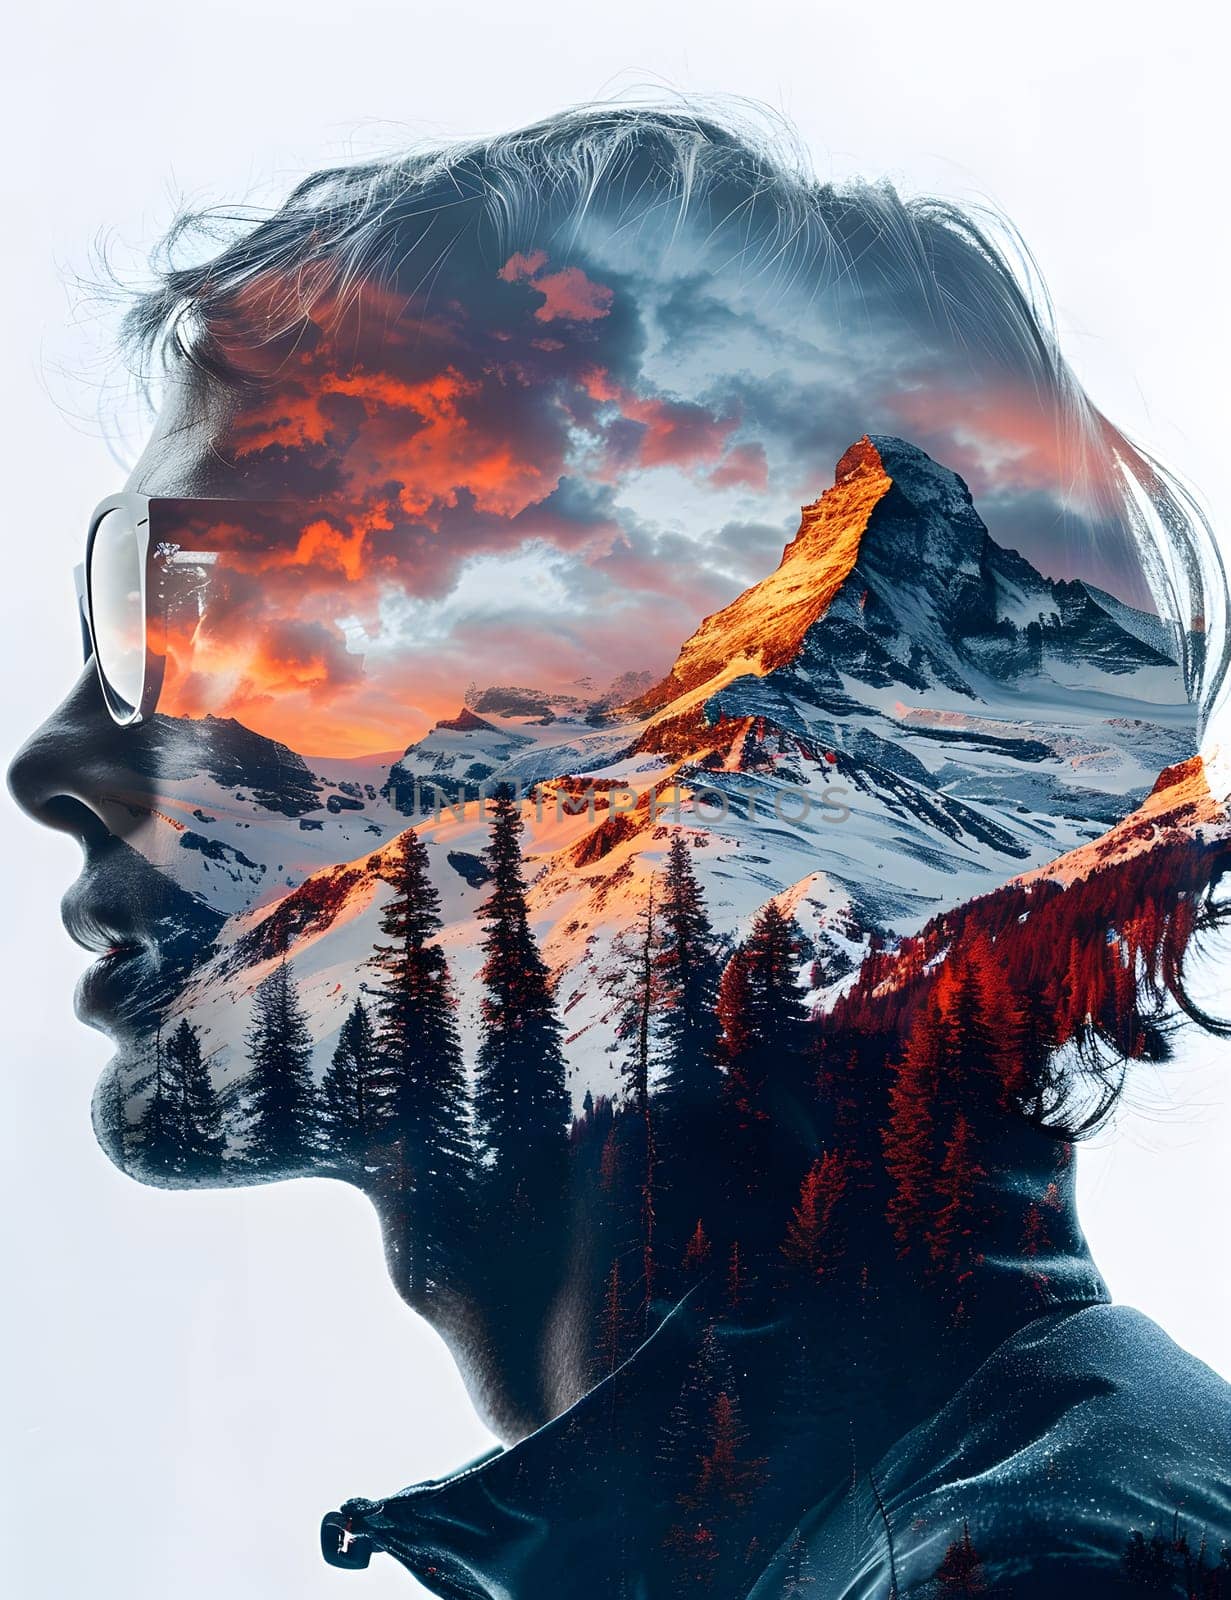 Double exposure of jawline and mountains in electric blue hues by Nadtochiy